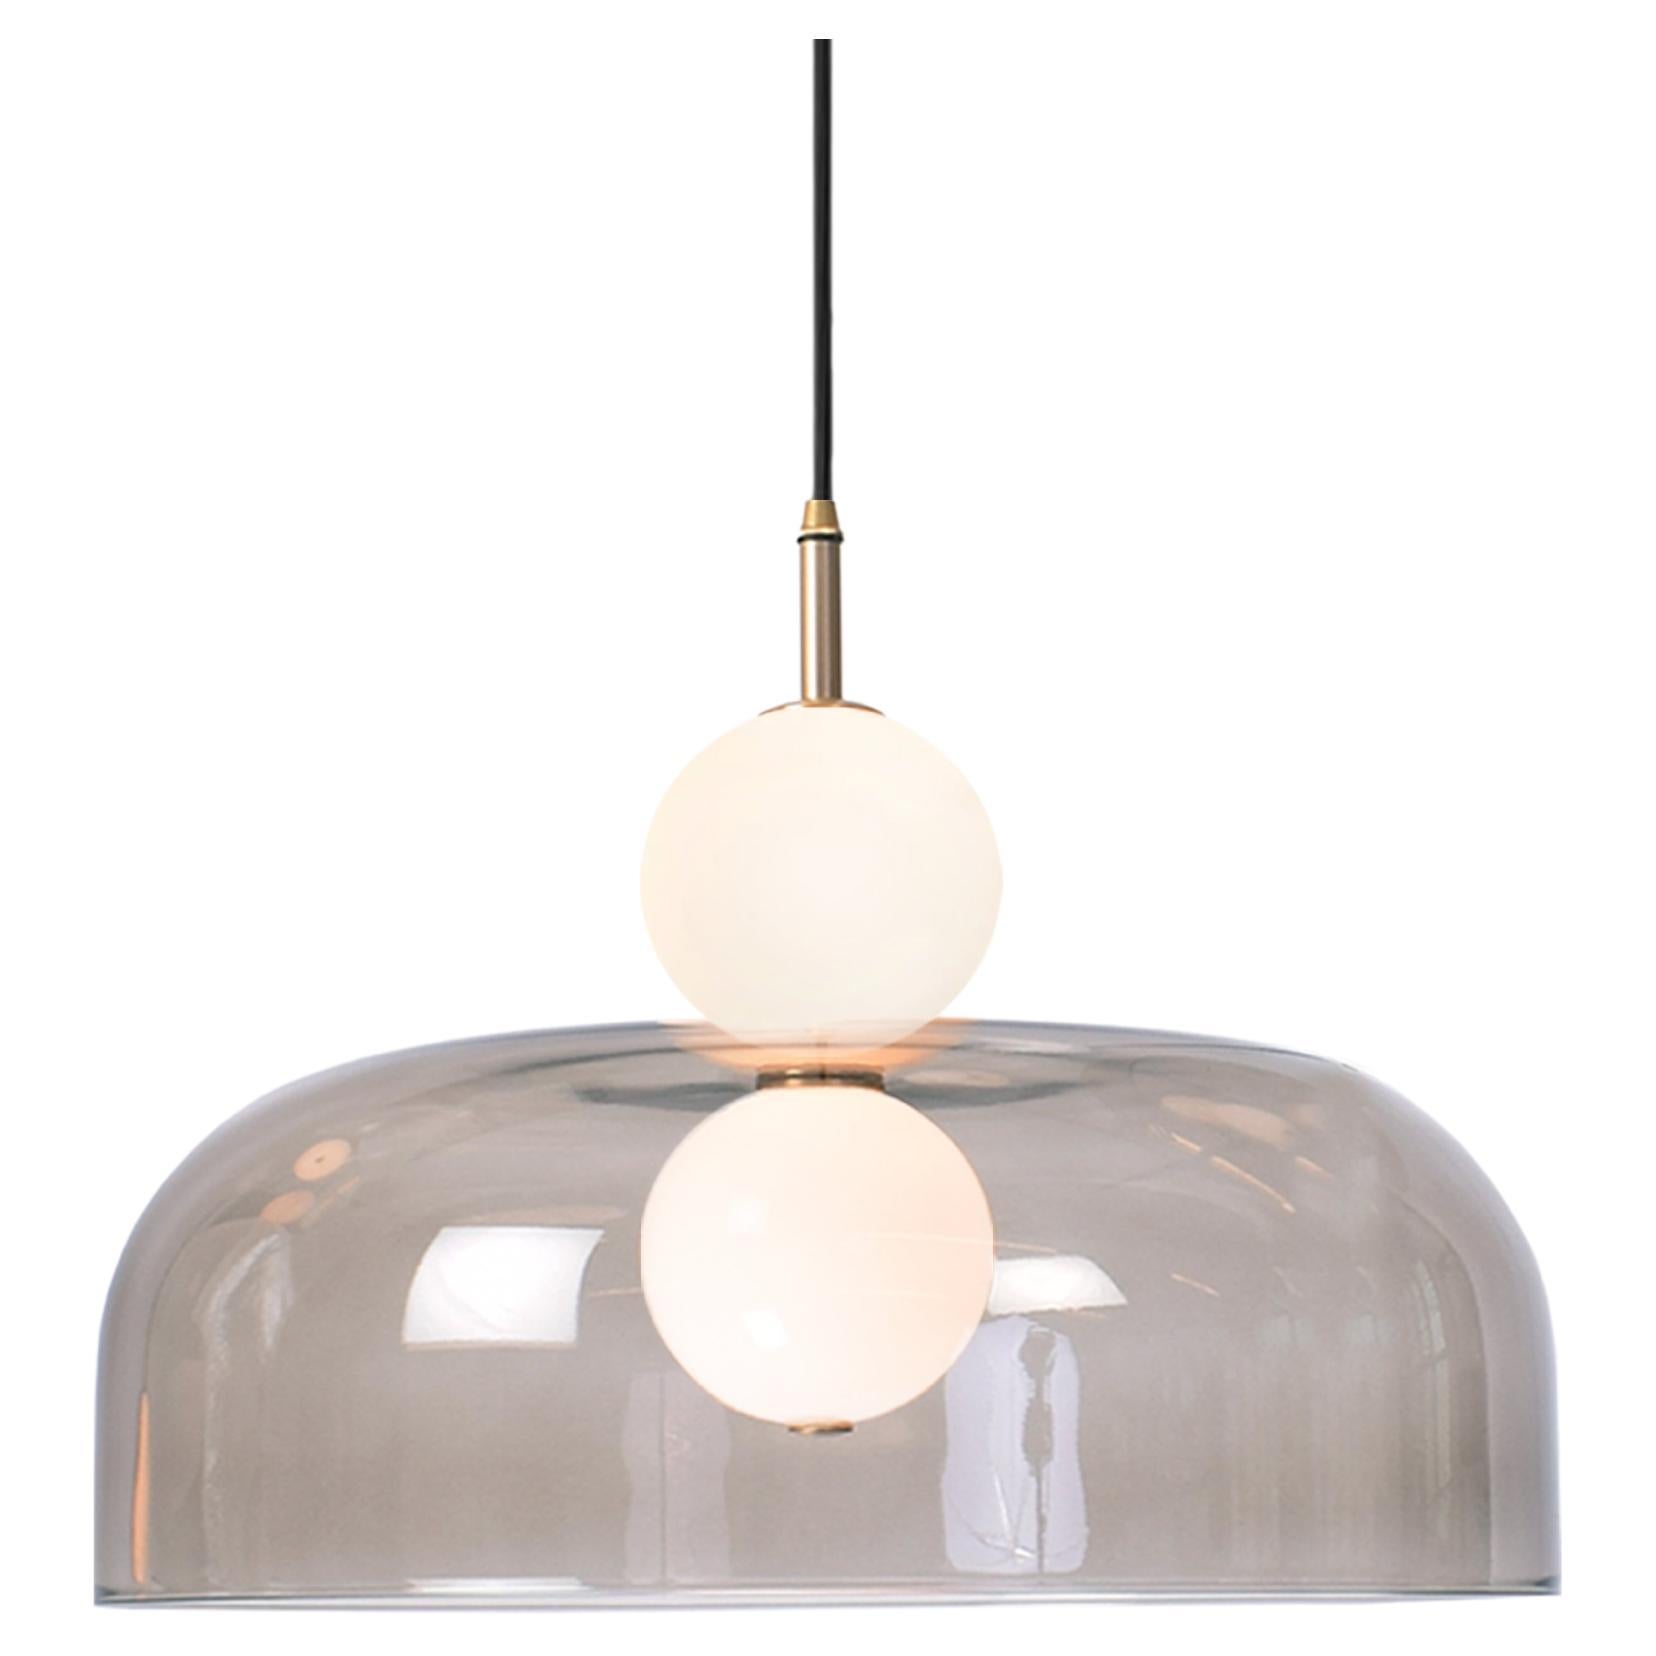 Echo Pendant, Lamp and Shade. Opal Glass Orbs, Smoked Shade and Brass Details.